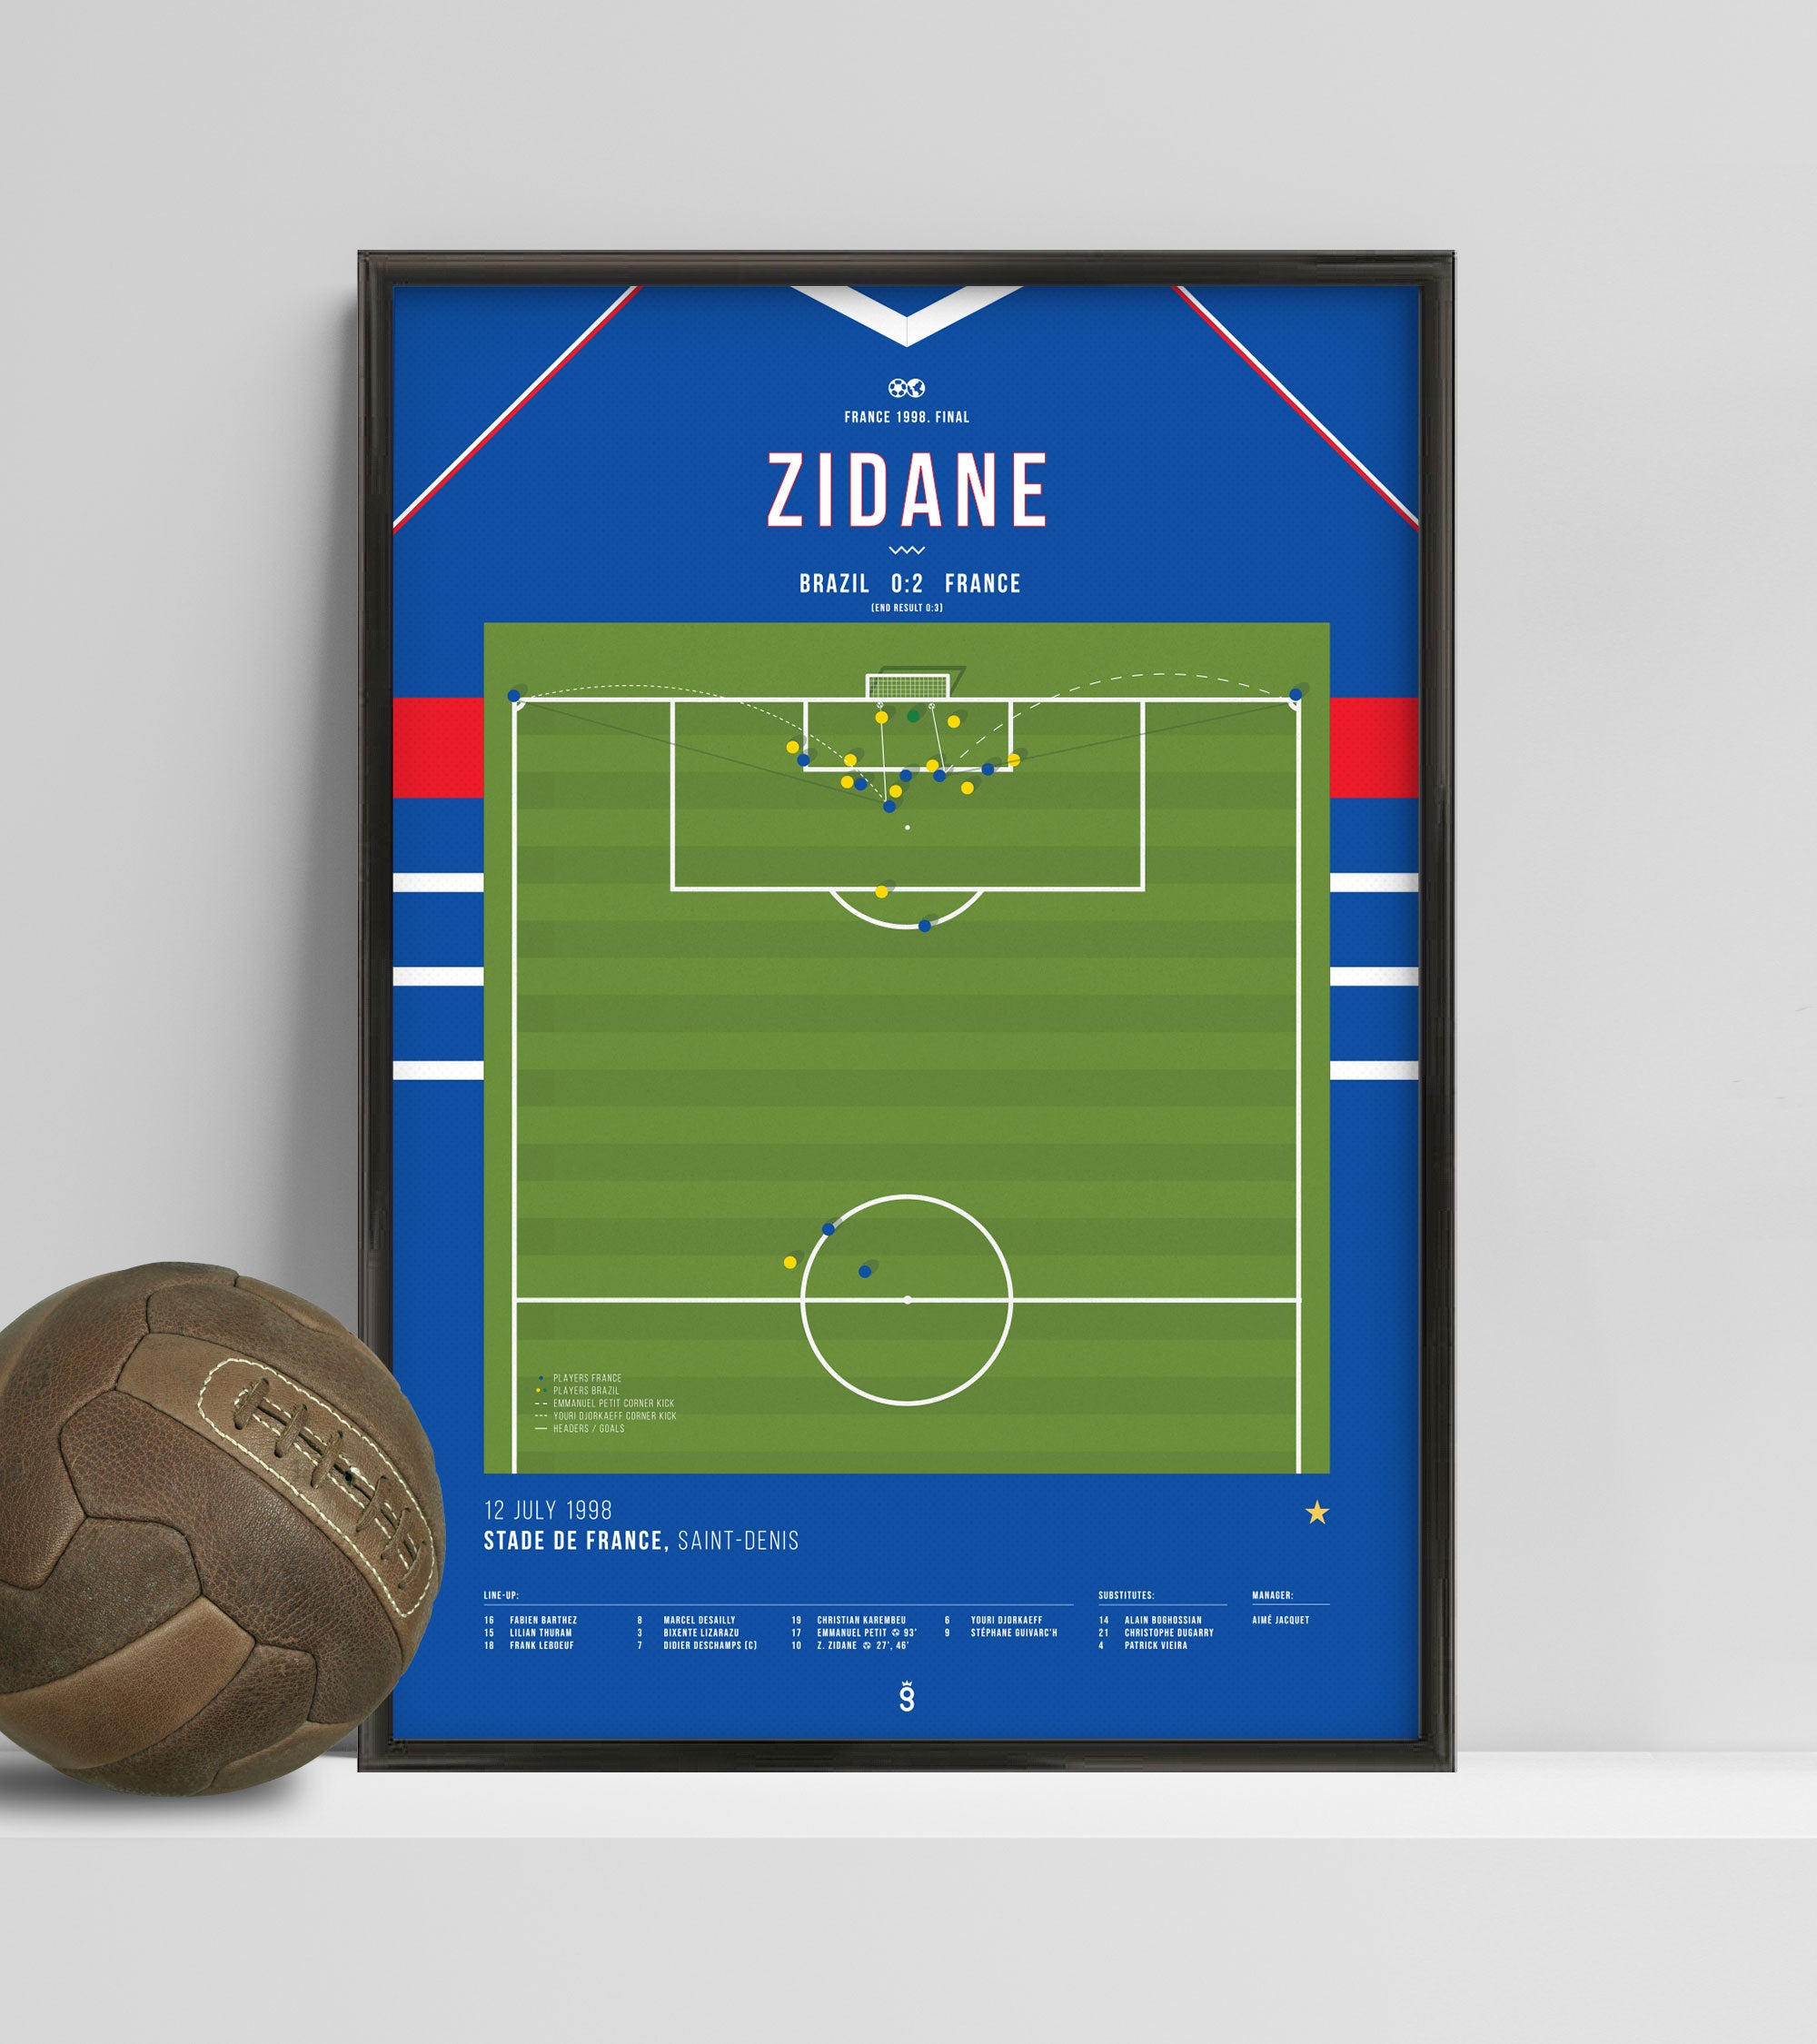 The greatest goal of all time.. 🤣 #greatest #goal #funny #zidane #zid